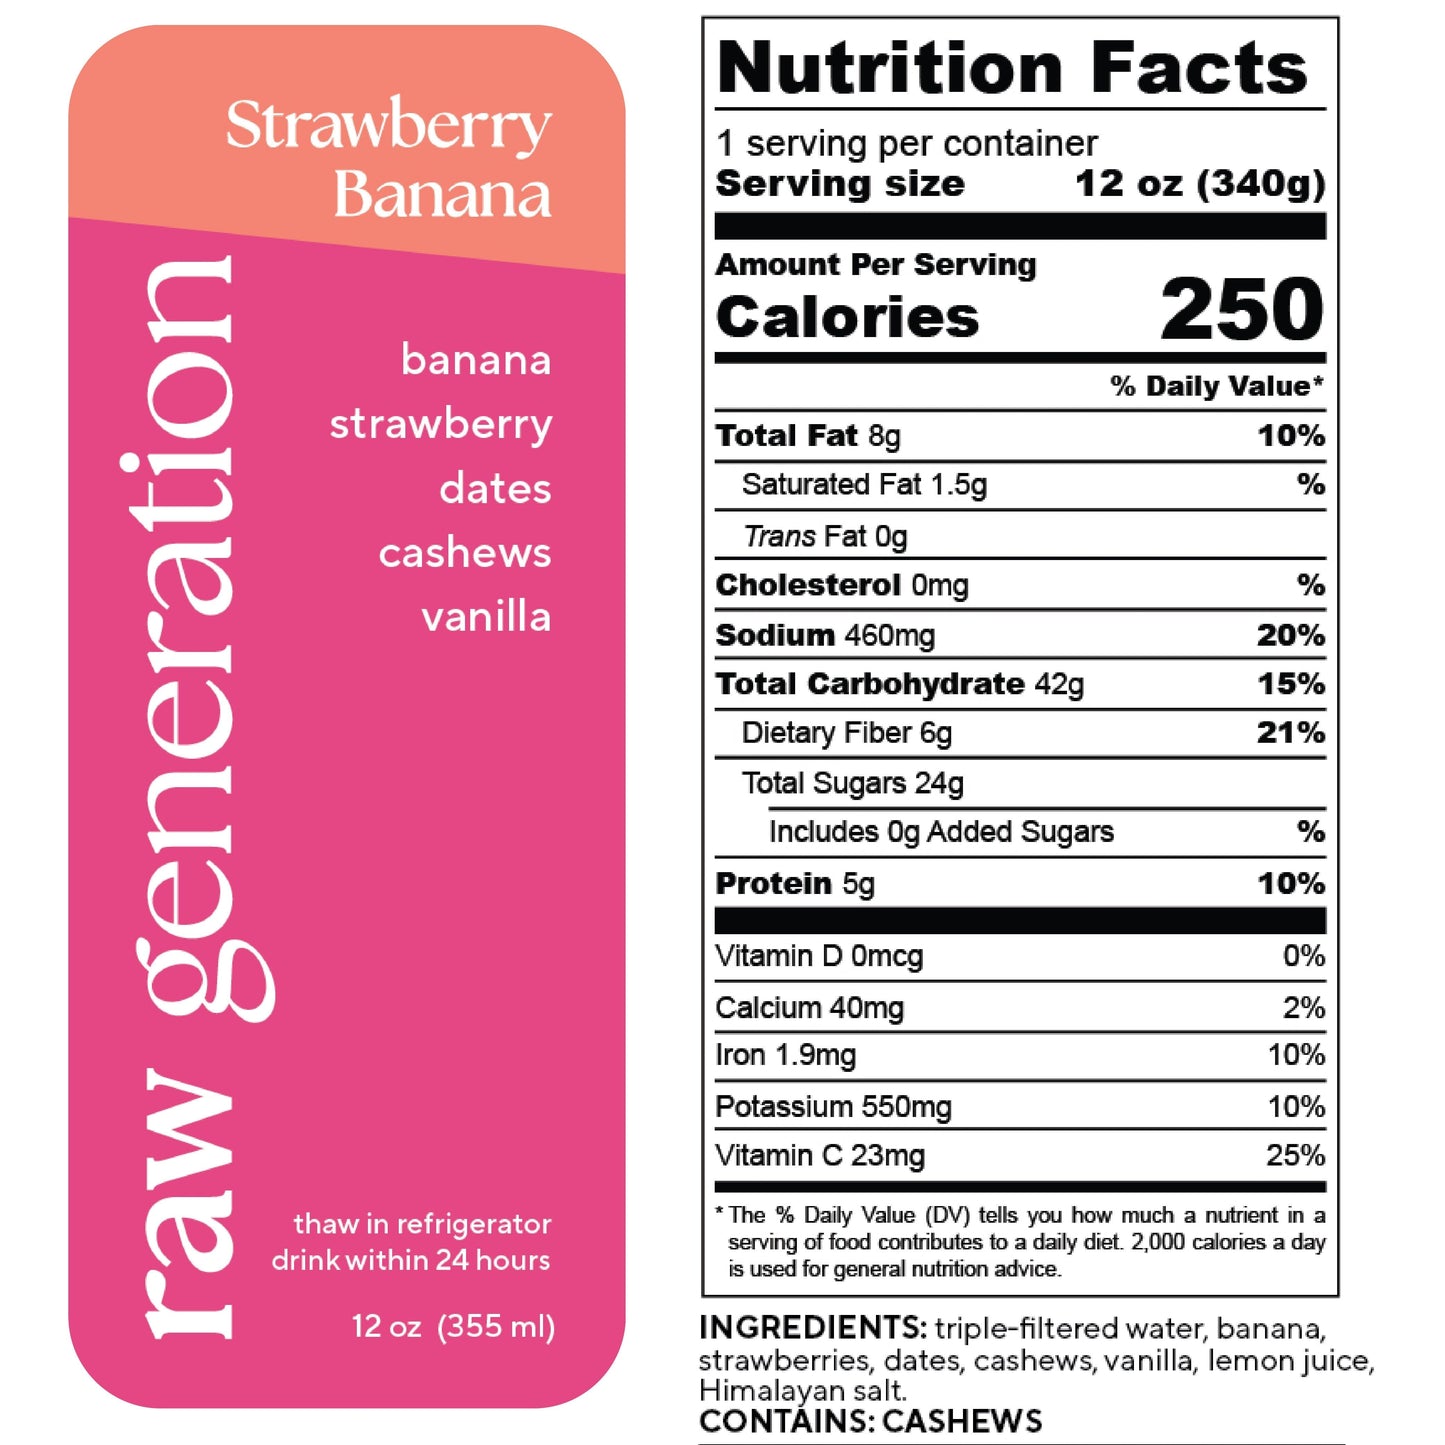 Nutrition Facts, 1 serving/container, Serving size 12 oz (340g), Calories 250, Total Fat 8g, Saturated Fat 1.5g, Trans Fat 0g, Cholesterol 0mg, Sodium 460mg, Total Carbohydrate 42g, Dietary Fiber 6g, Total Sugars 24g, Added Sugars 0g, Protein 5g, Vitamin D 0mcg, Calcium 40mg, Iron 1.9mg, Potassium 550mg, Vitamin C 23mg; Ingredients used: triple-filtered water, banana, strawberries, dates, cashews, vanilla, lemon juice, Himalayan salt. CONTAINS: CASHEWS.